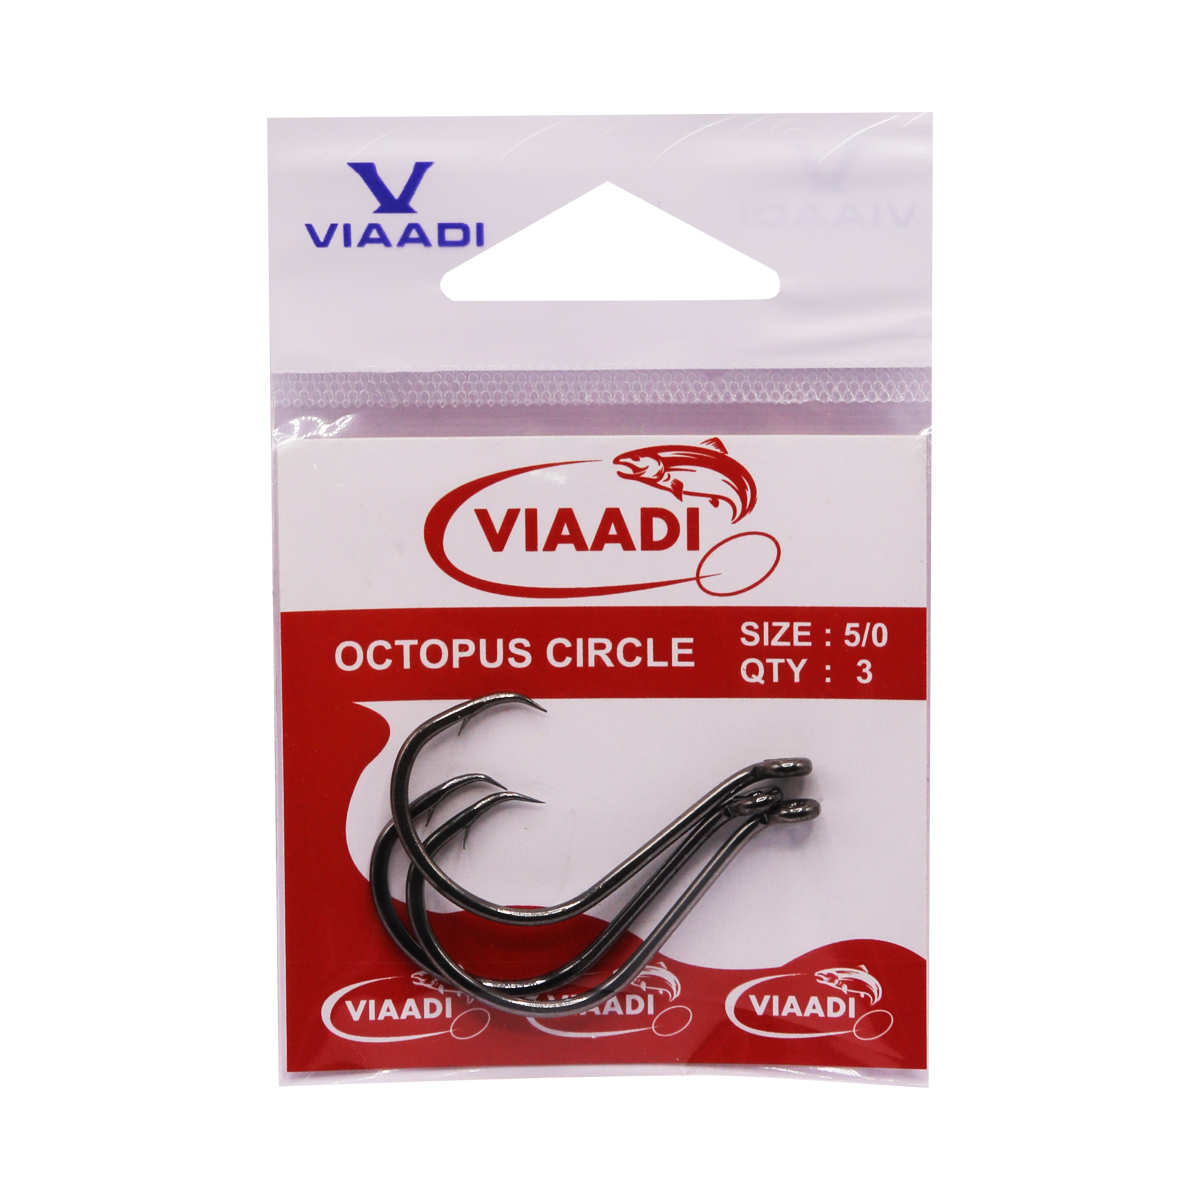 VERDDE Fishing Hooks, 5PC Small Size Red Hook Barbed Fishhook